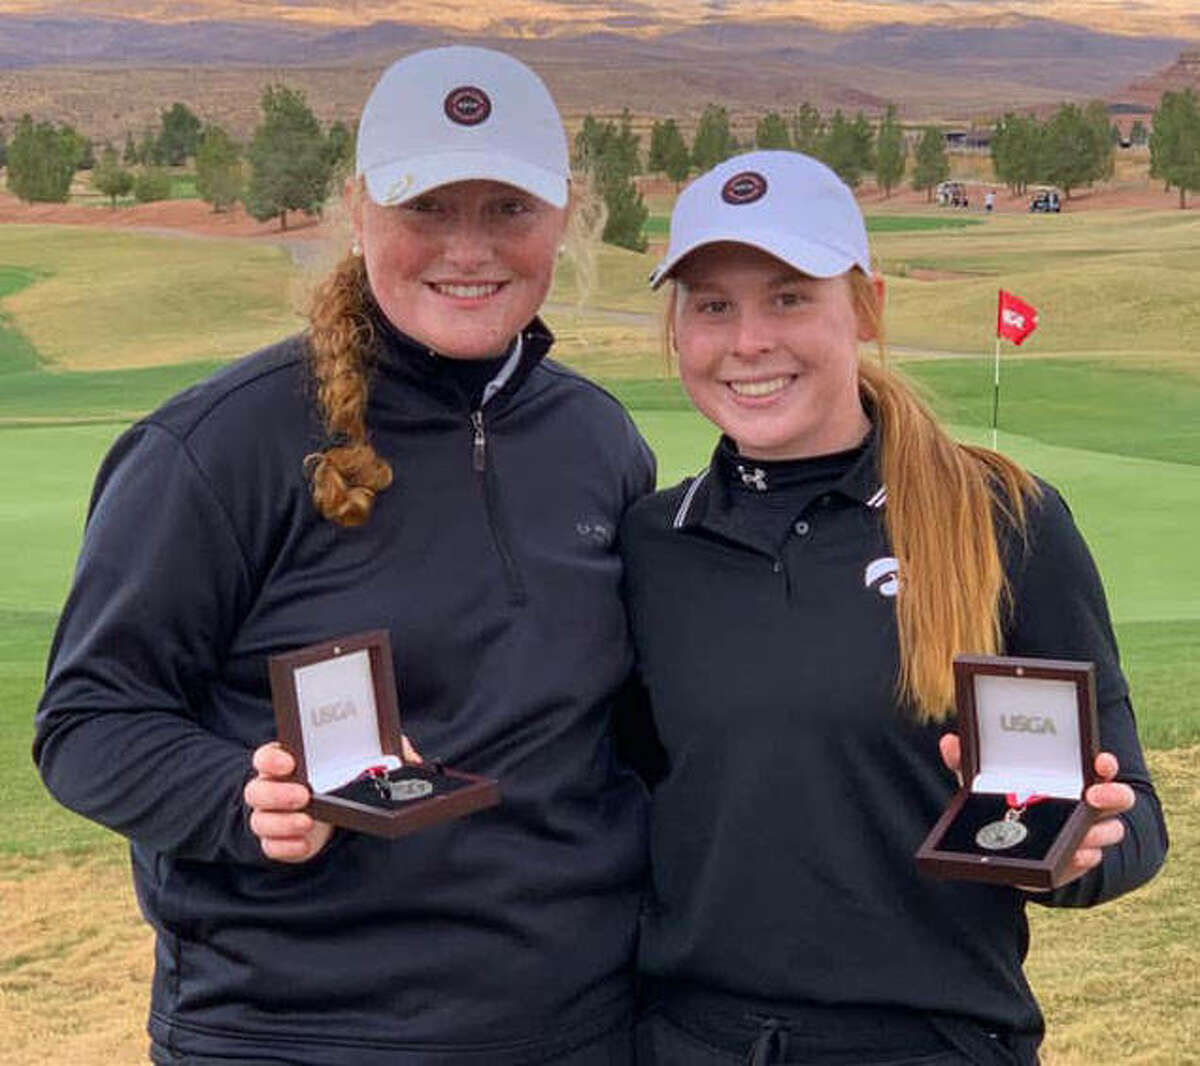 Marquette Catholic junior Gracie Piar (left) and Edwardsville junior Riley Lewis show off their championship medals from the 2021 U.S. Women’s Amateur Four-Ball Qualifying golf tourney Monday at SunRiver Golf Club in St. George, Utah.